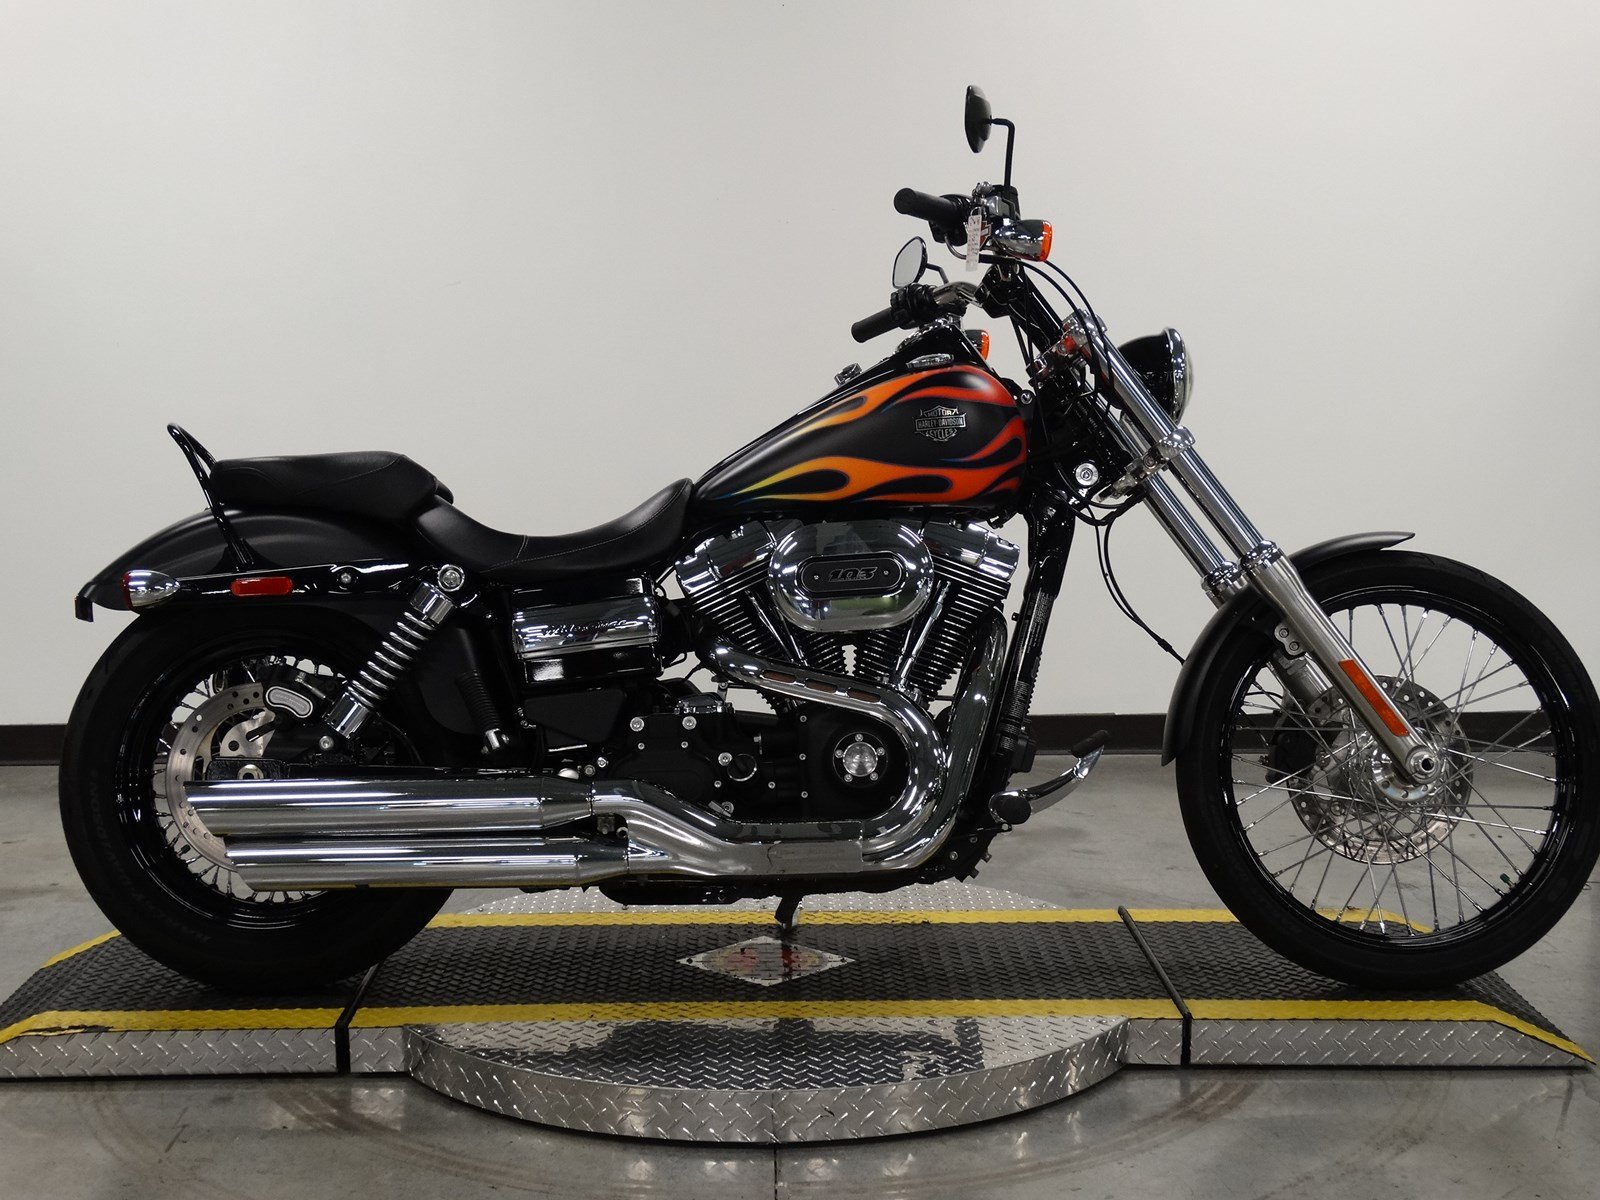 Pre-Owned 2016 Harley-Davidson Dyna Wide Glide FXDWG Dyna in Olathe # ...